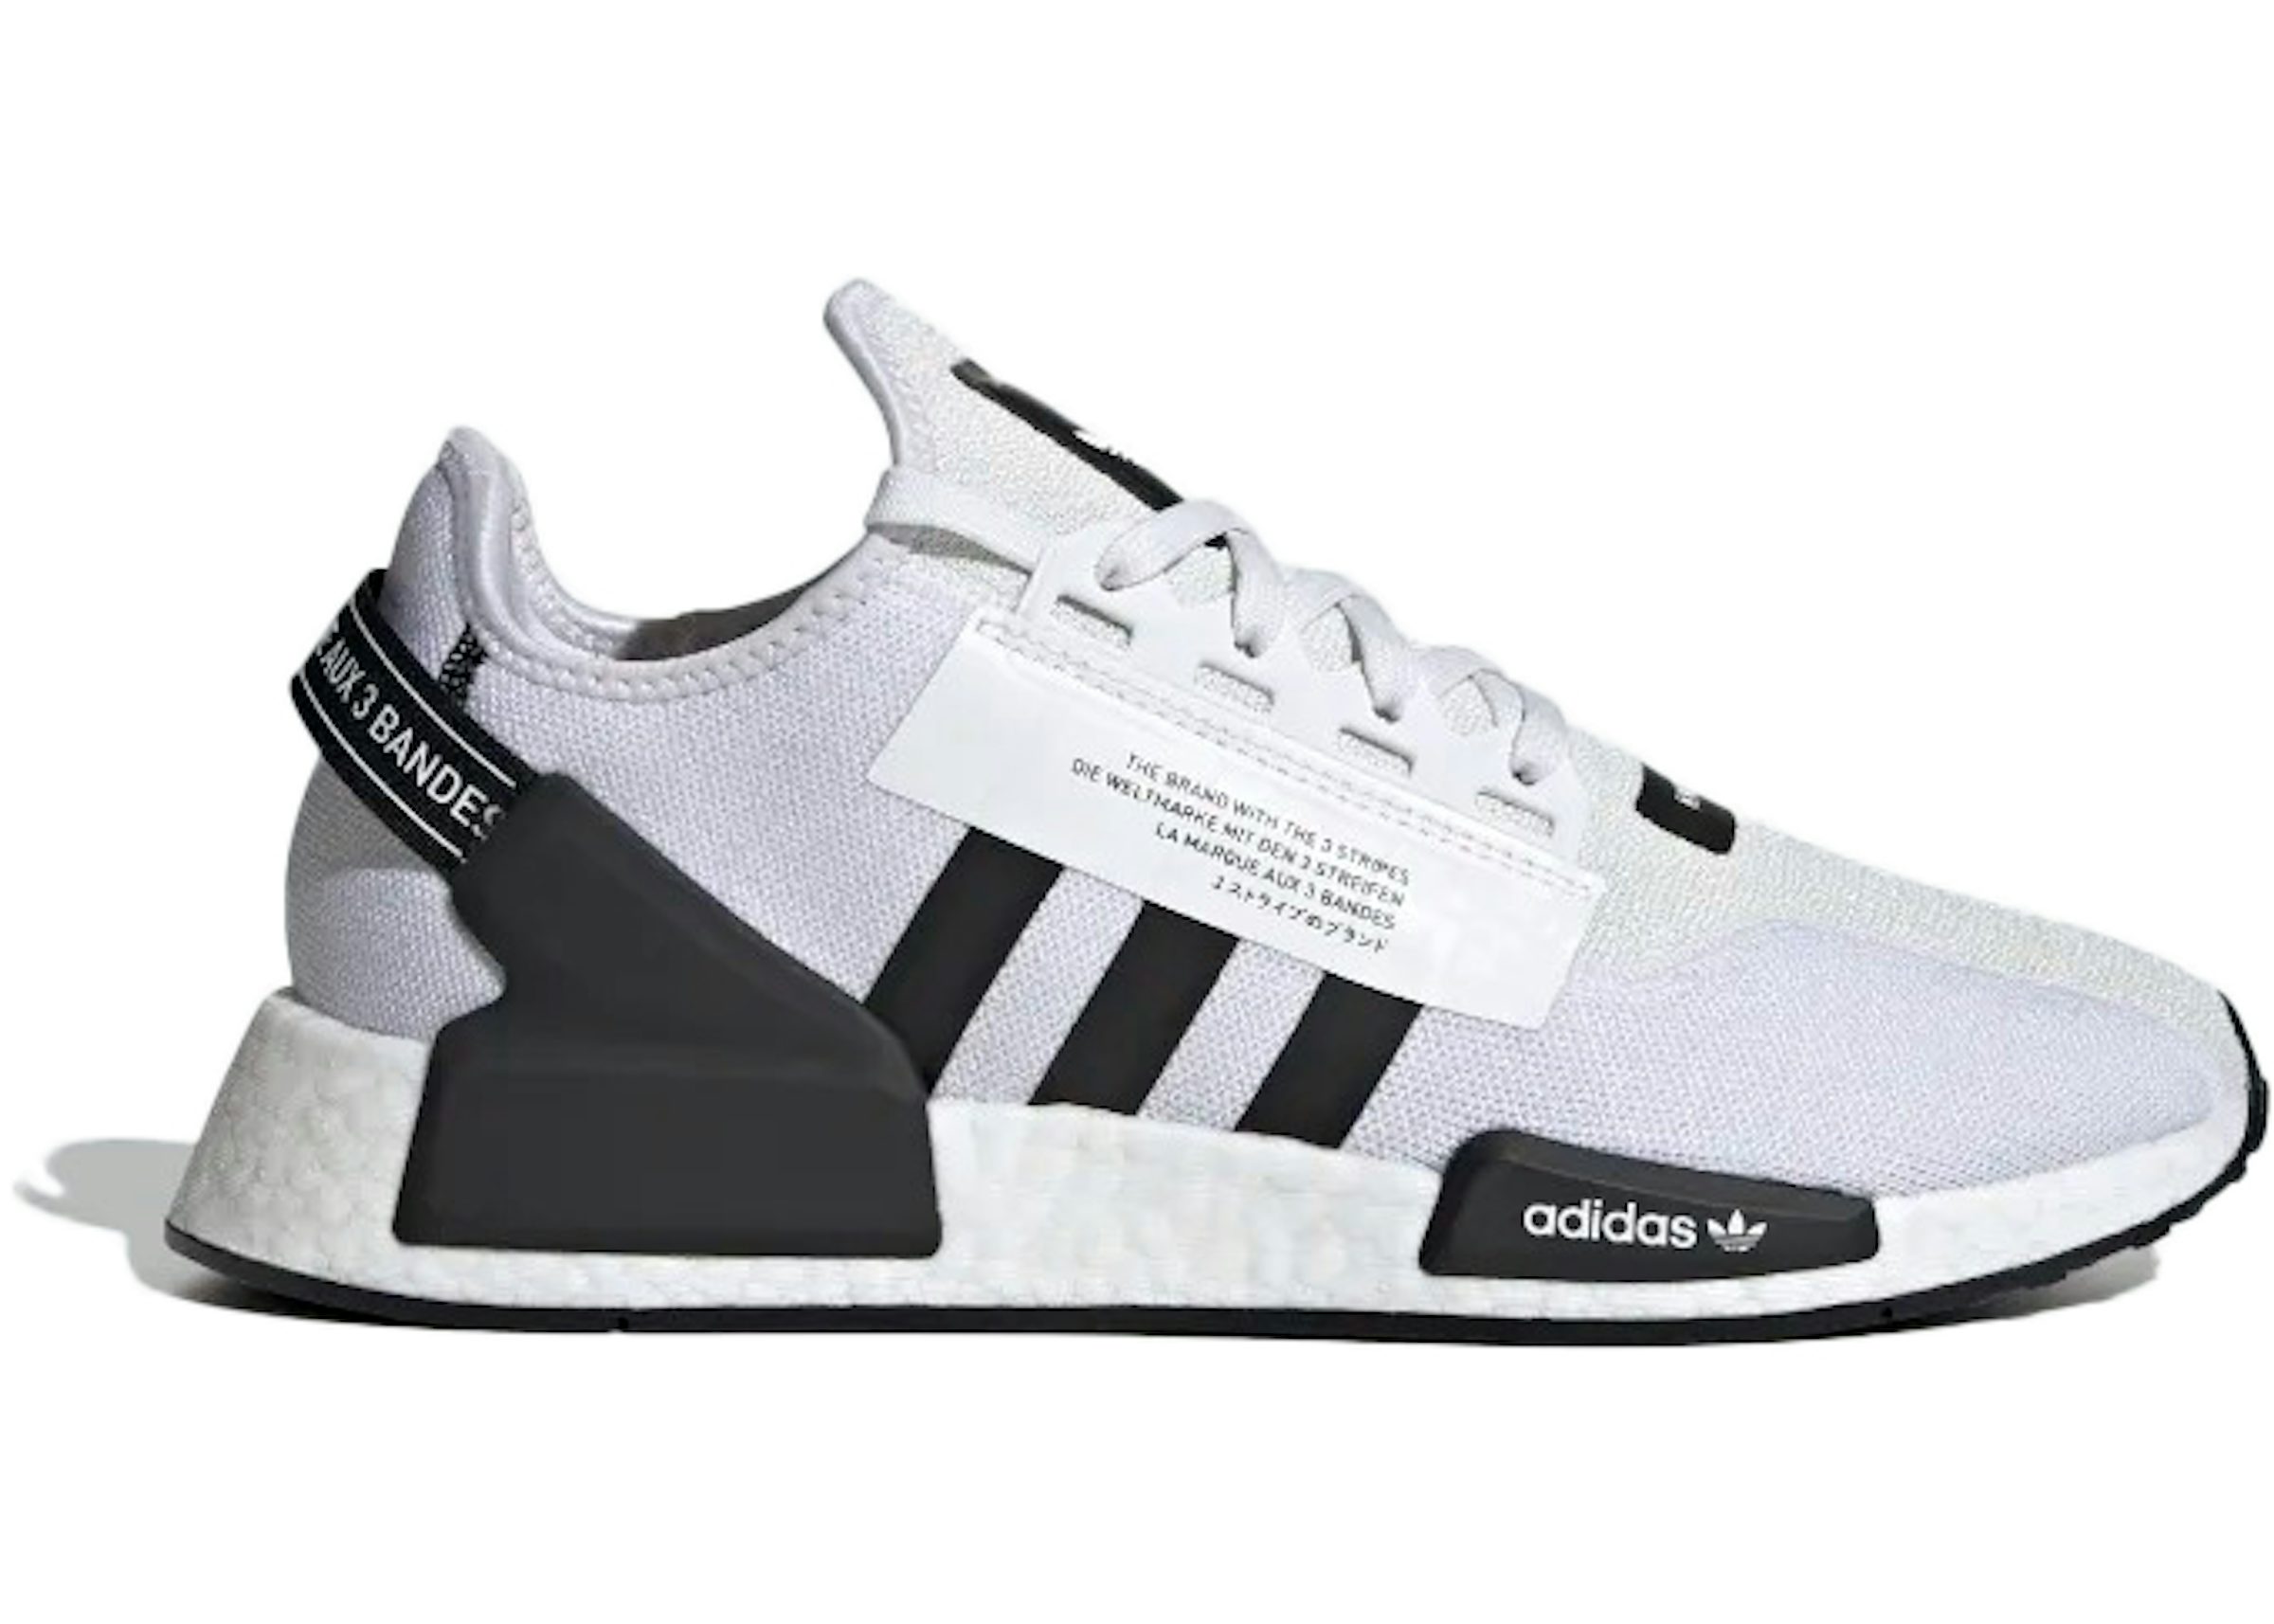 Adidas Nmd XR1 BY9924 Black Solar Red Boost Running Shoes Sneakers Men -  beyond exchange